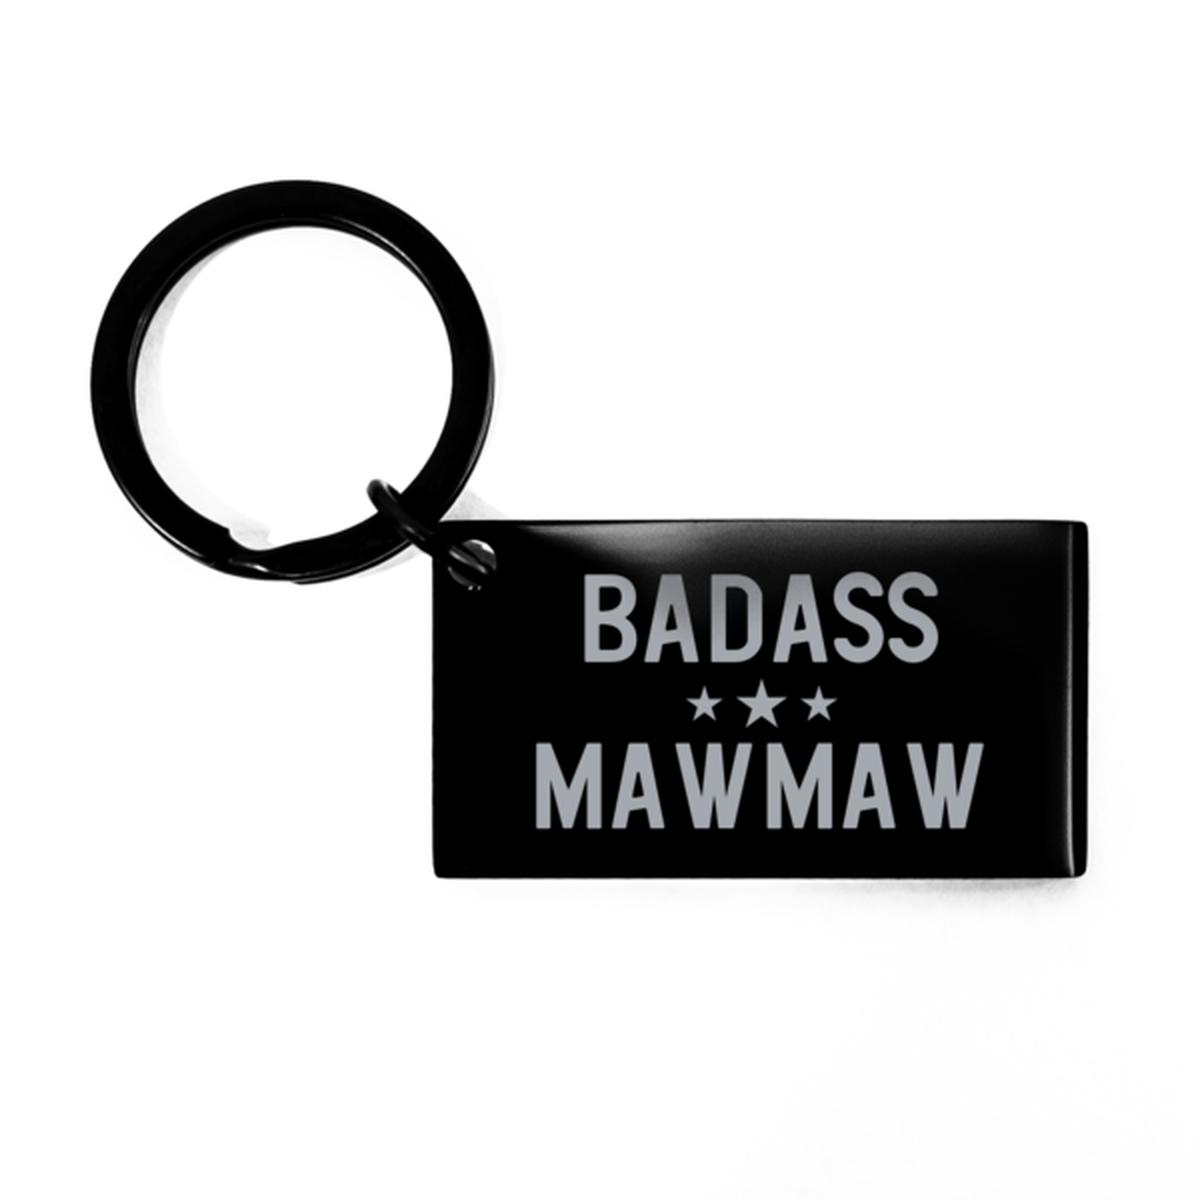 Mawmaw Black Keychain, Badass Mawmaw, Funny Family Gifts  Keyring For Mawmaw From Granddaughter Grandson